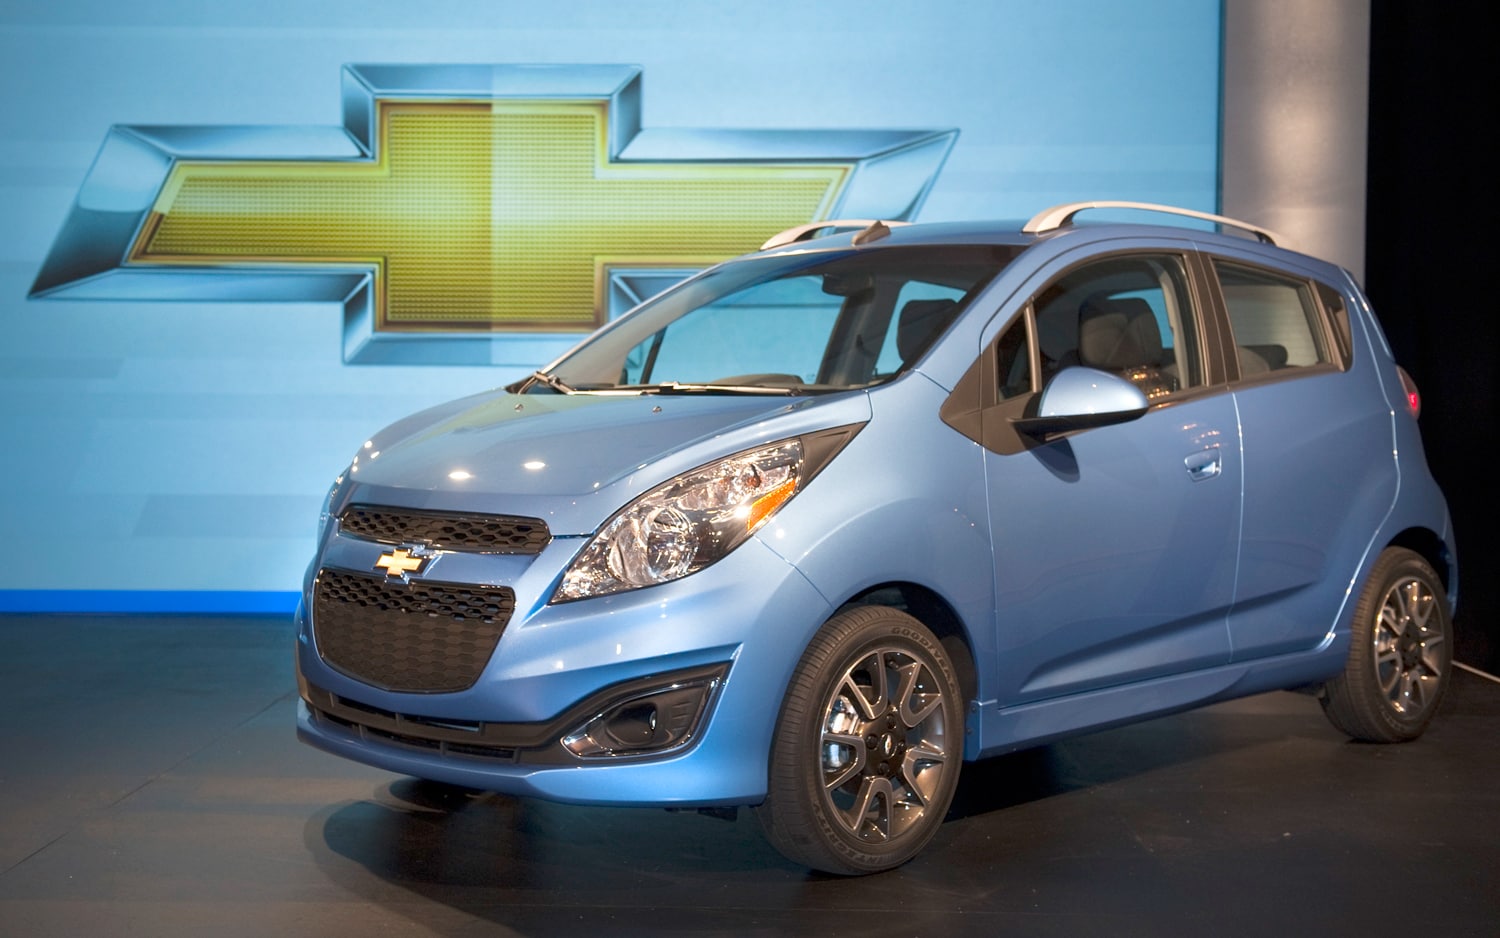 2013 Chevy Spark Coming to U.S. Next Year with New Engines, EV Version